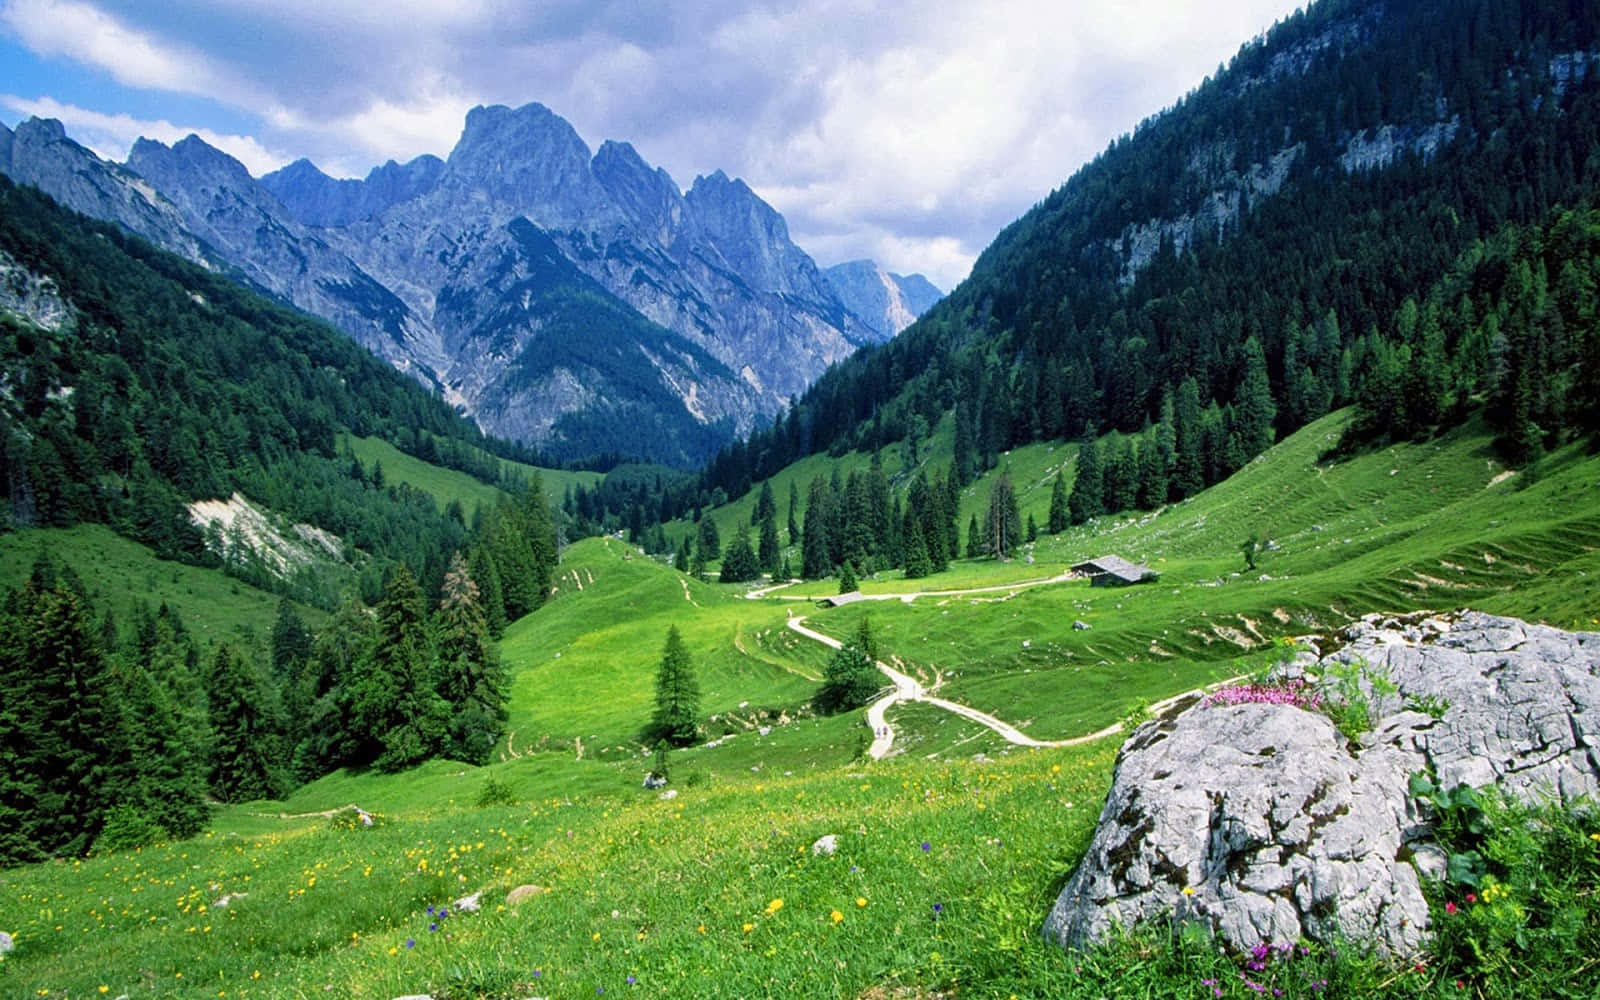 Stunning Landscape of a Valley in Pakistan